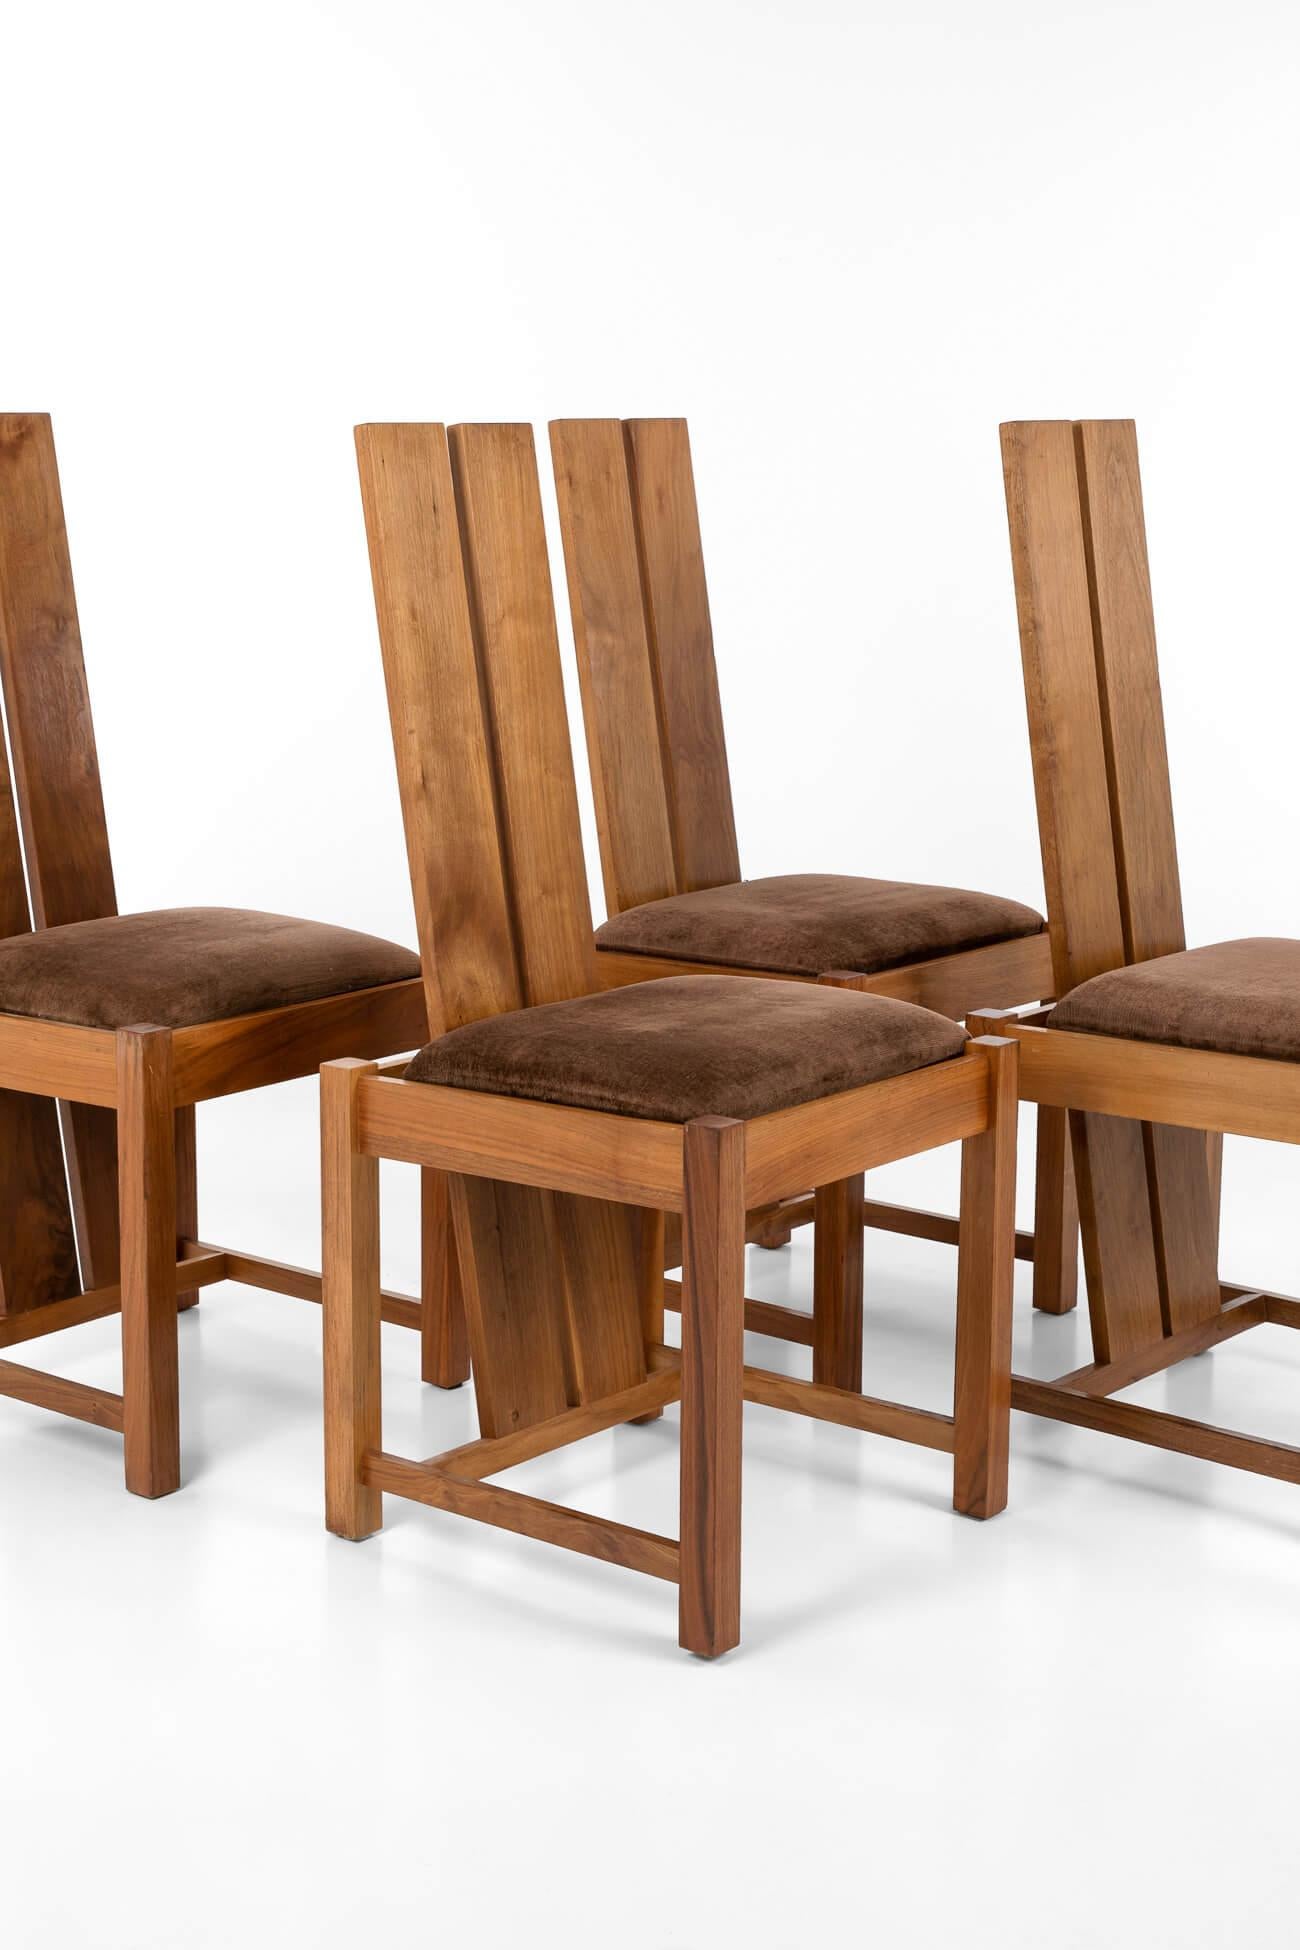 British Set of Four Samuel Chan Alba Dining Chairs in Solid Walnut, Early 20th Century For Sale